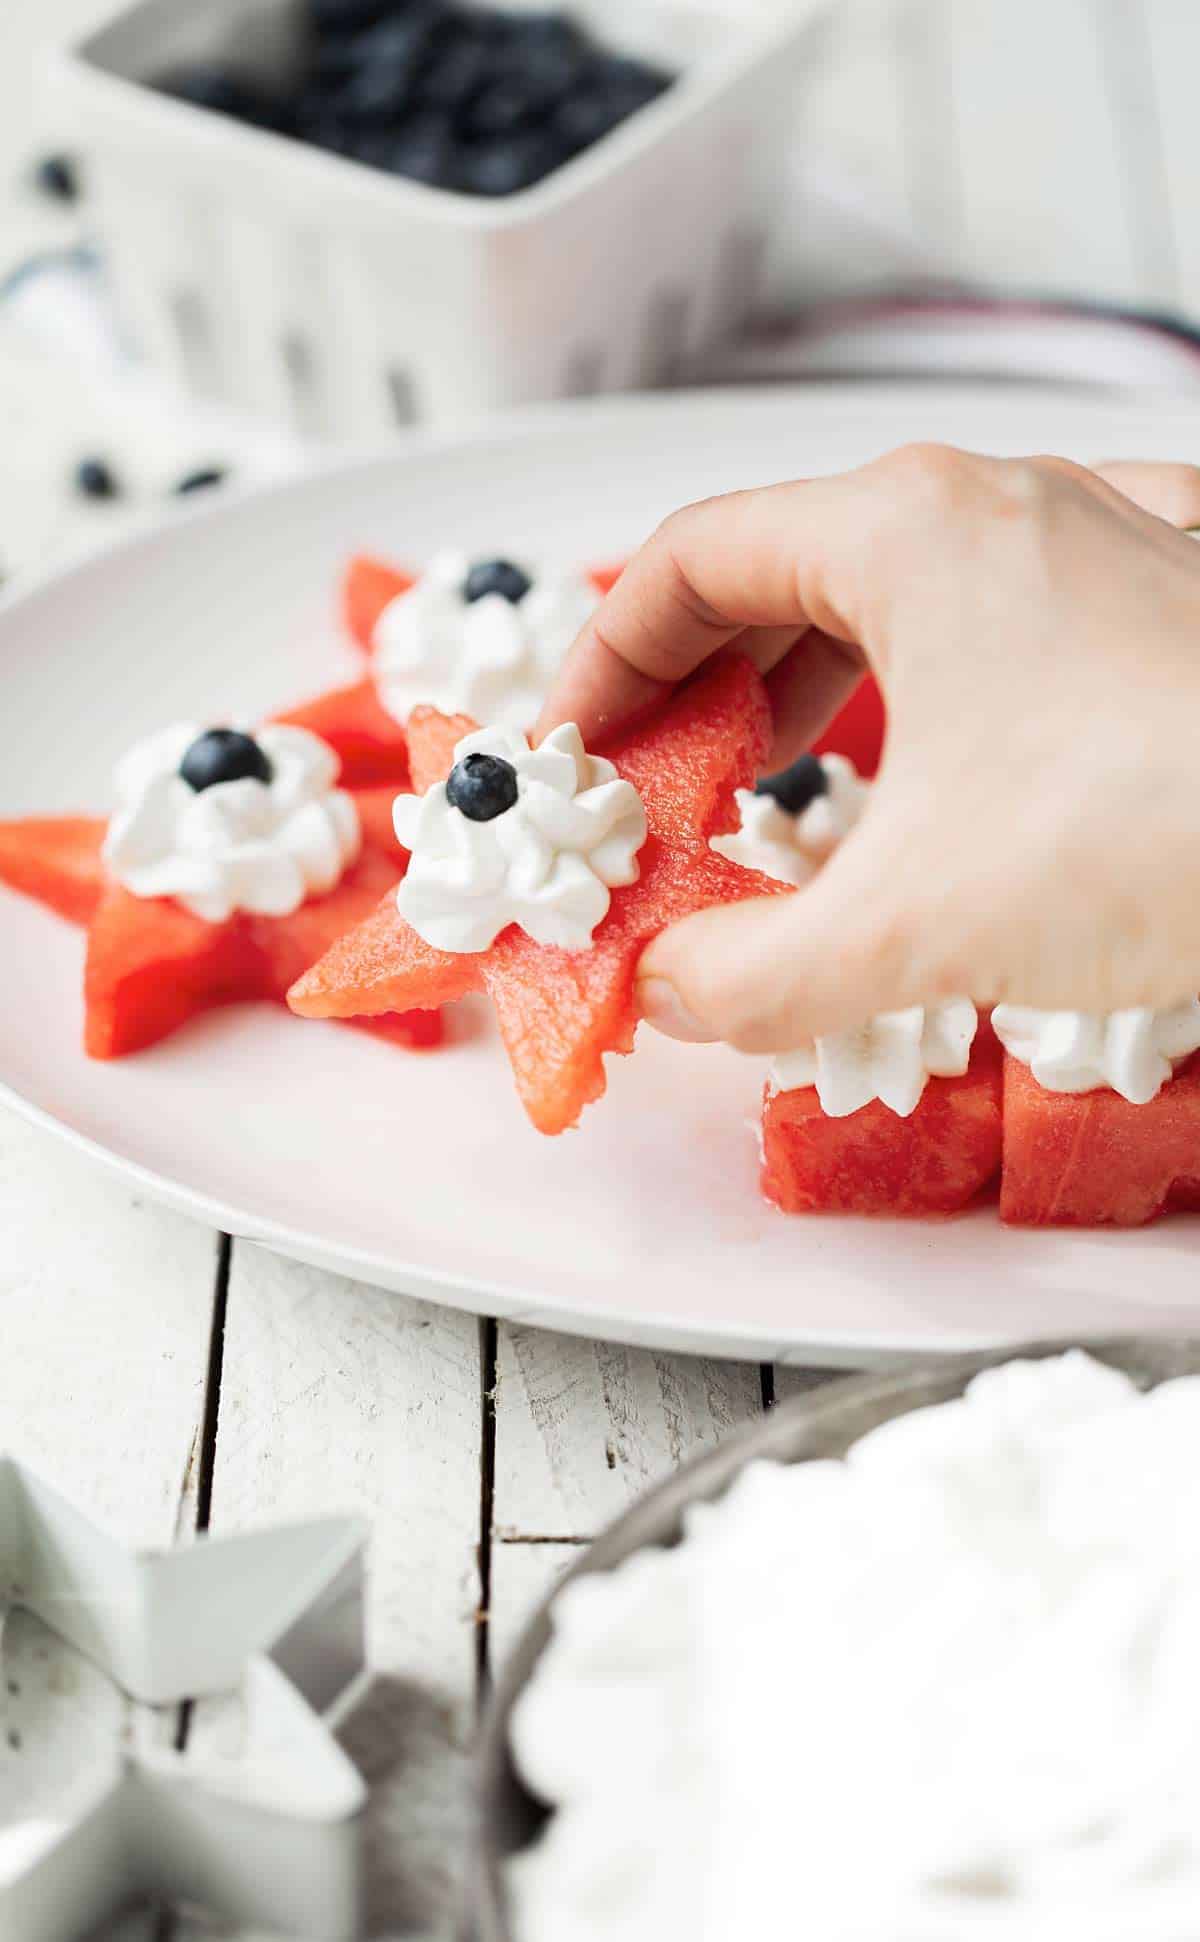 Watermelon Fruit Salad Bites are a delicious refreshing watermelon salad served as a bite sized red, white and blue appetizer. fruit salad | watermelon salad | fourth of july fruit salad